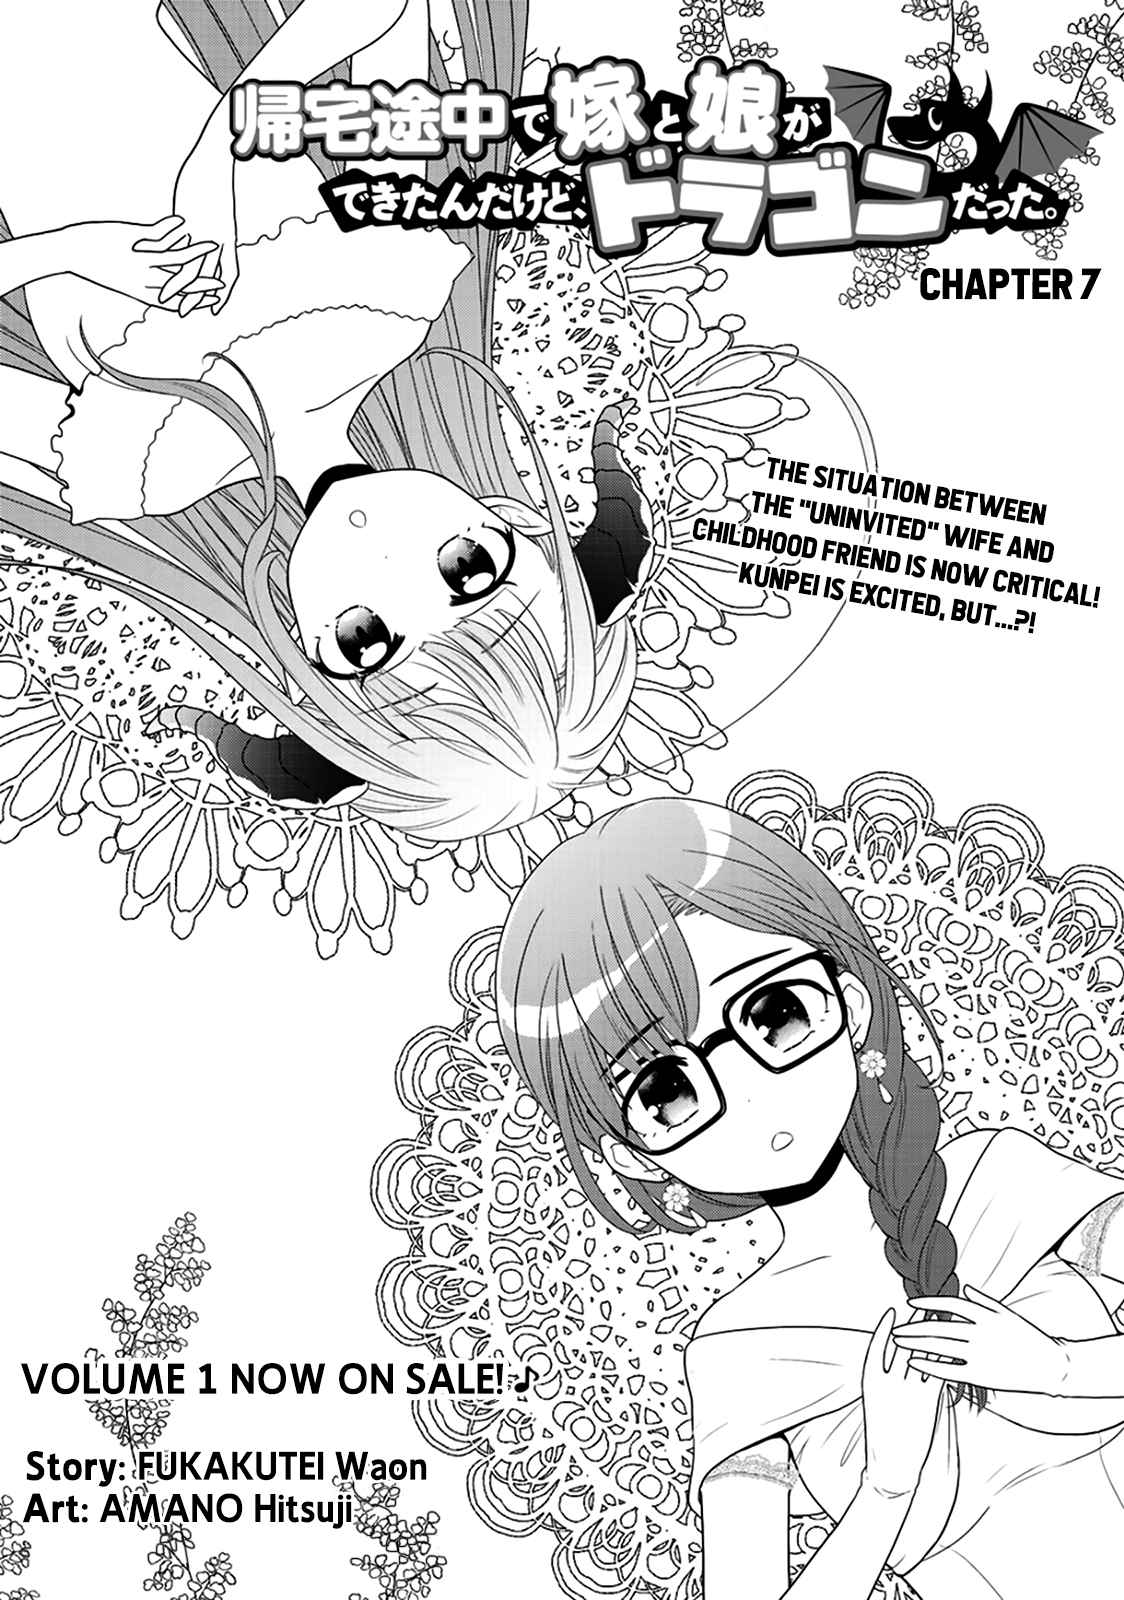 On The Way Home, I Got A Bride And Twin Daughters, But They Were Dragons Ch.7